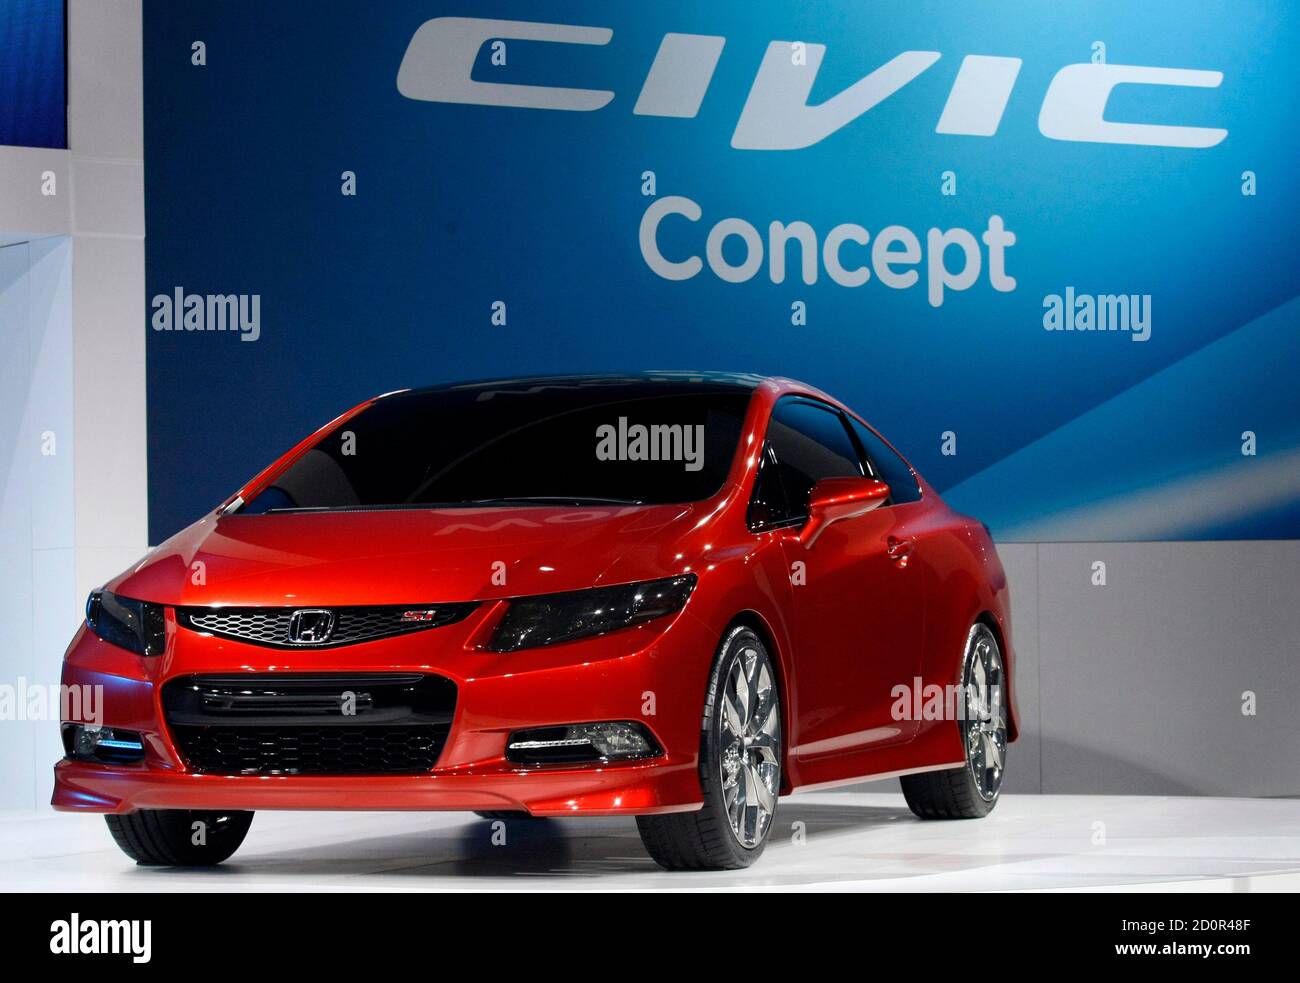 American Honda Motors introduces its new Honda Civic concept vehicle during  press preview day at Cobo Center of the North American International Auto  show in Detroit, Michigan January 10, 2011. REUTERS/Rebecca Cook (